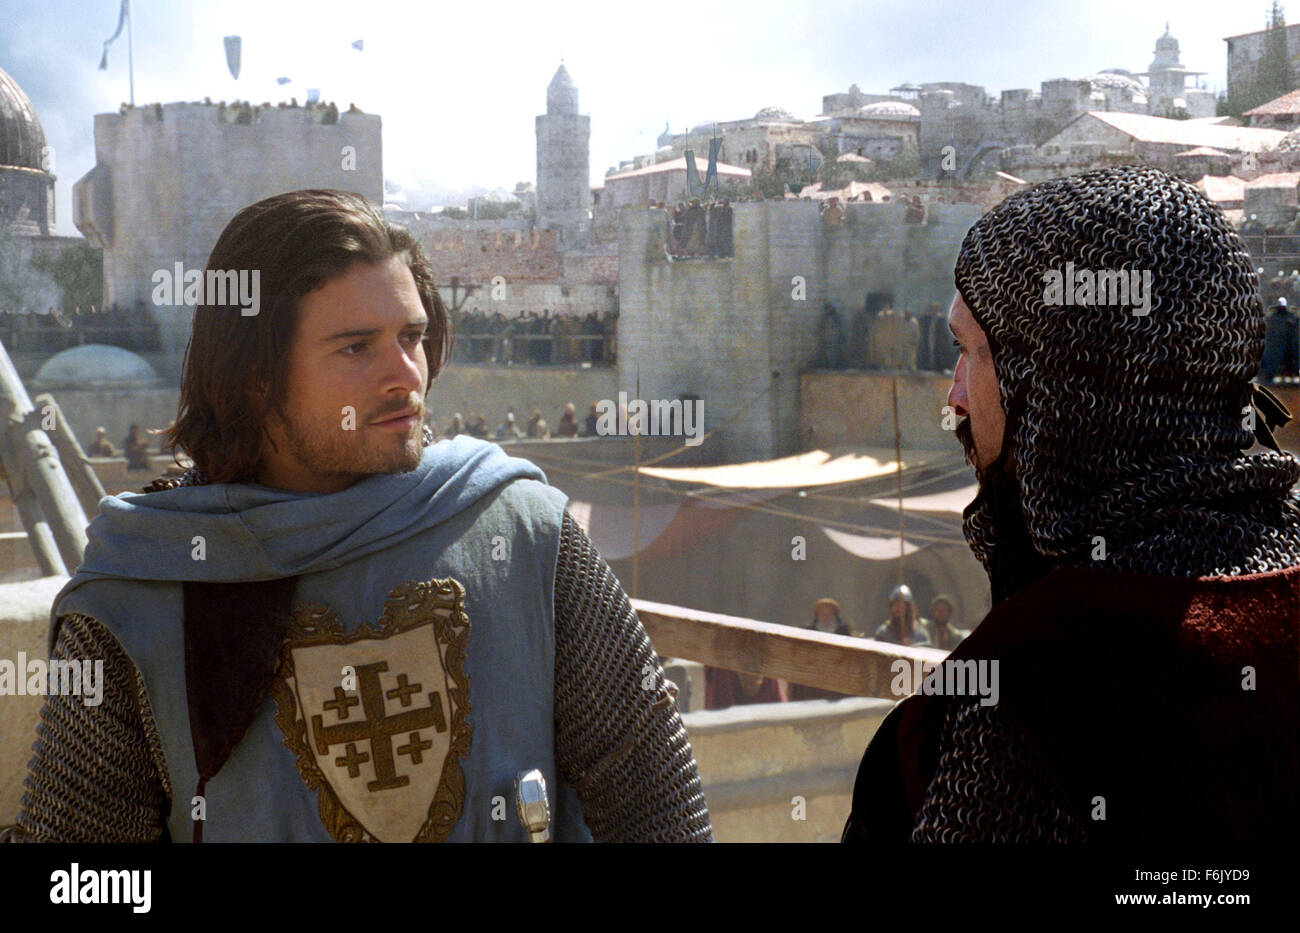 RELEASE DATE: May 6, 2005   MOVIE TITLE: Kingdom of Heaven   STUDIO: 20th Century Fox   PLOT: Balian of Ibelin travels to Jerusalem during the crusades of the 12th century, and there he finds himself as the defender of the city and its people. Directed by Ridley Scott.   PICTURED: ORLANDO BLOOM as Balian de Ibelin and MARTIN HANCOCK as Gravedigger.   (Credit Image: c 20th Century Fox/Entertainment Pictures) Stock Photo